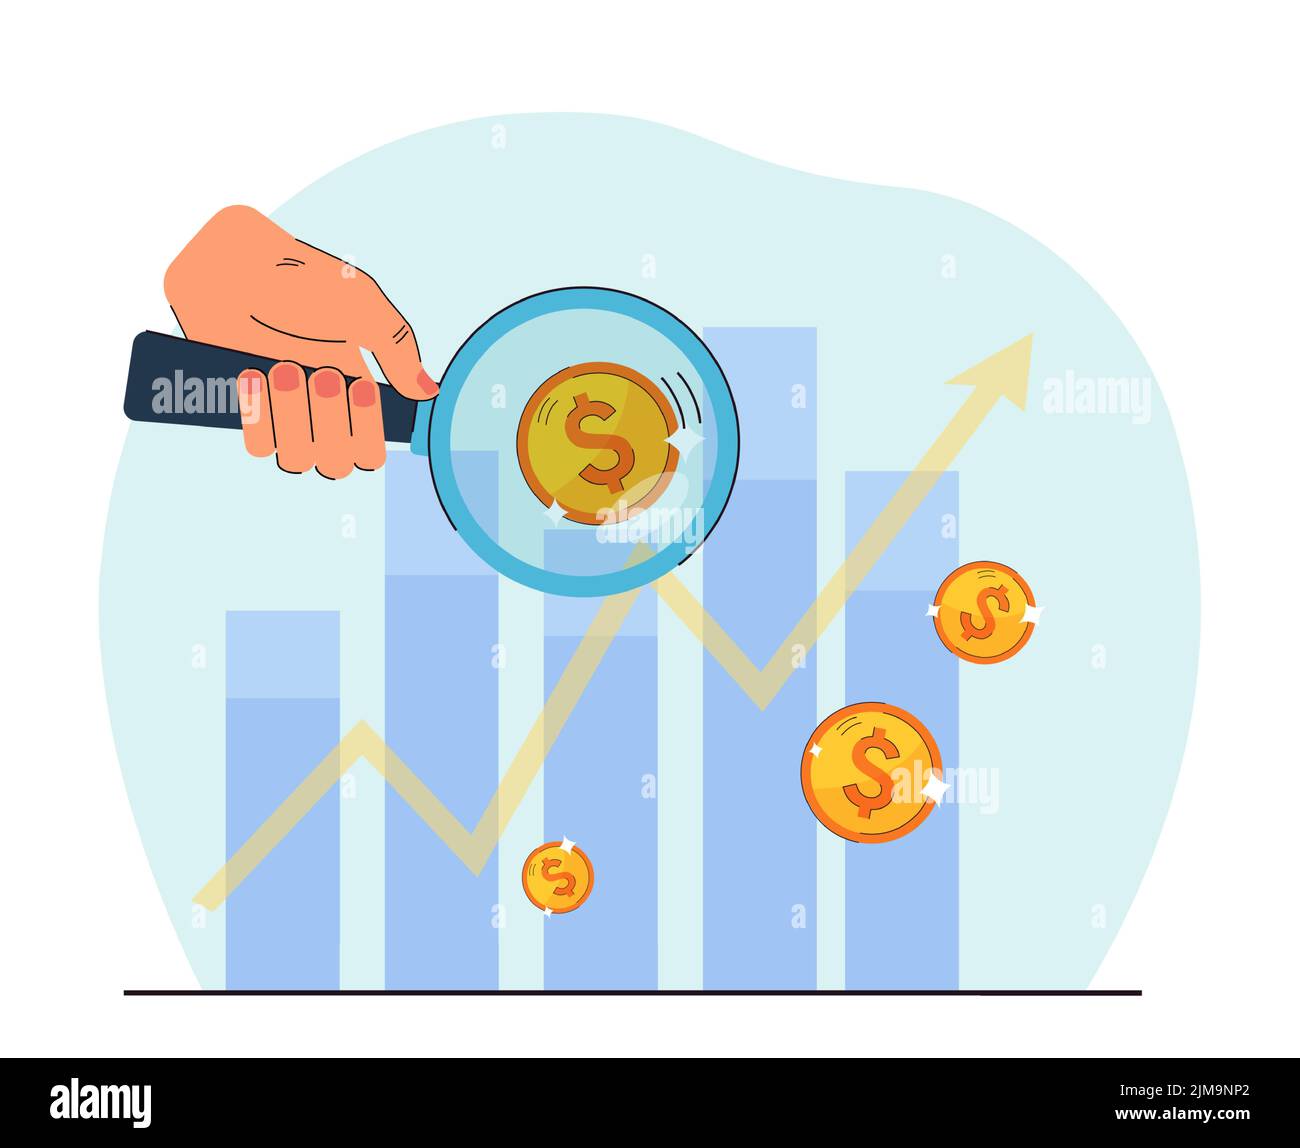 Person analyzing financial chart. Hand holding magnifying glass against charts with coins. Finance, banking, business concept for banner, website desi Stock Vector